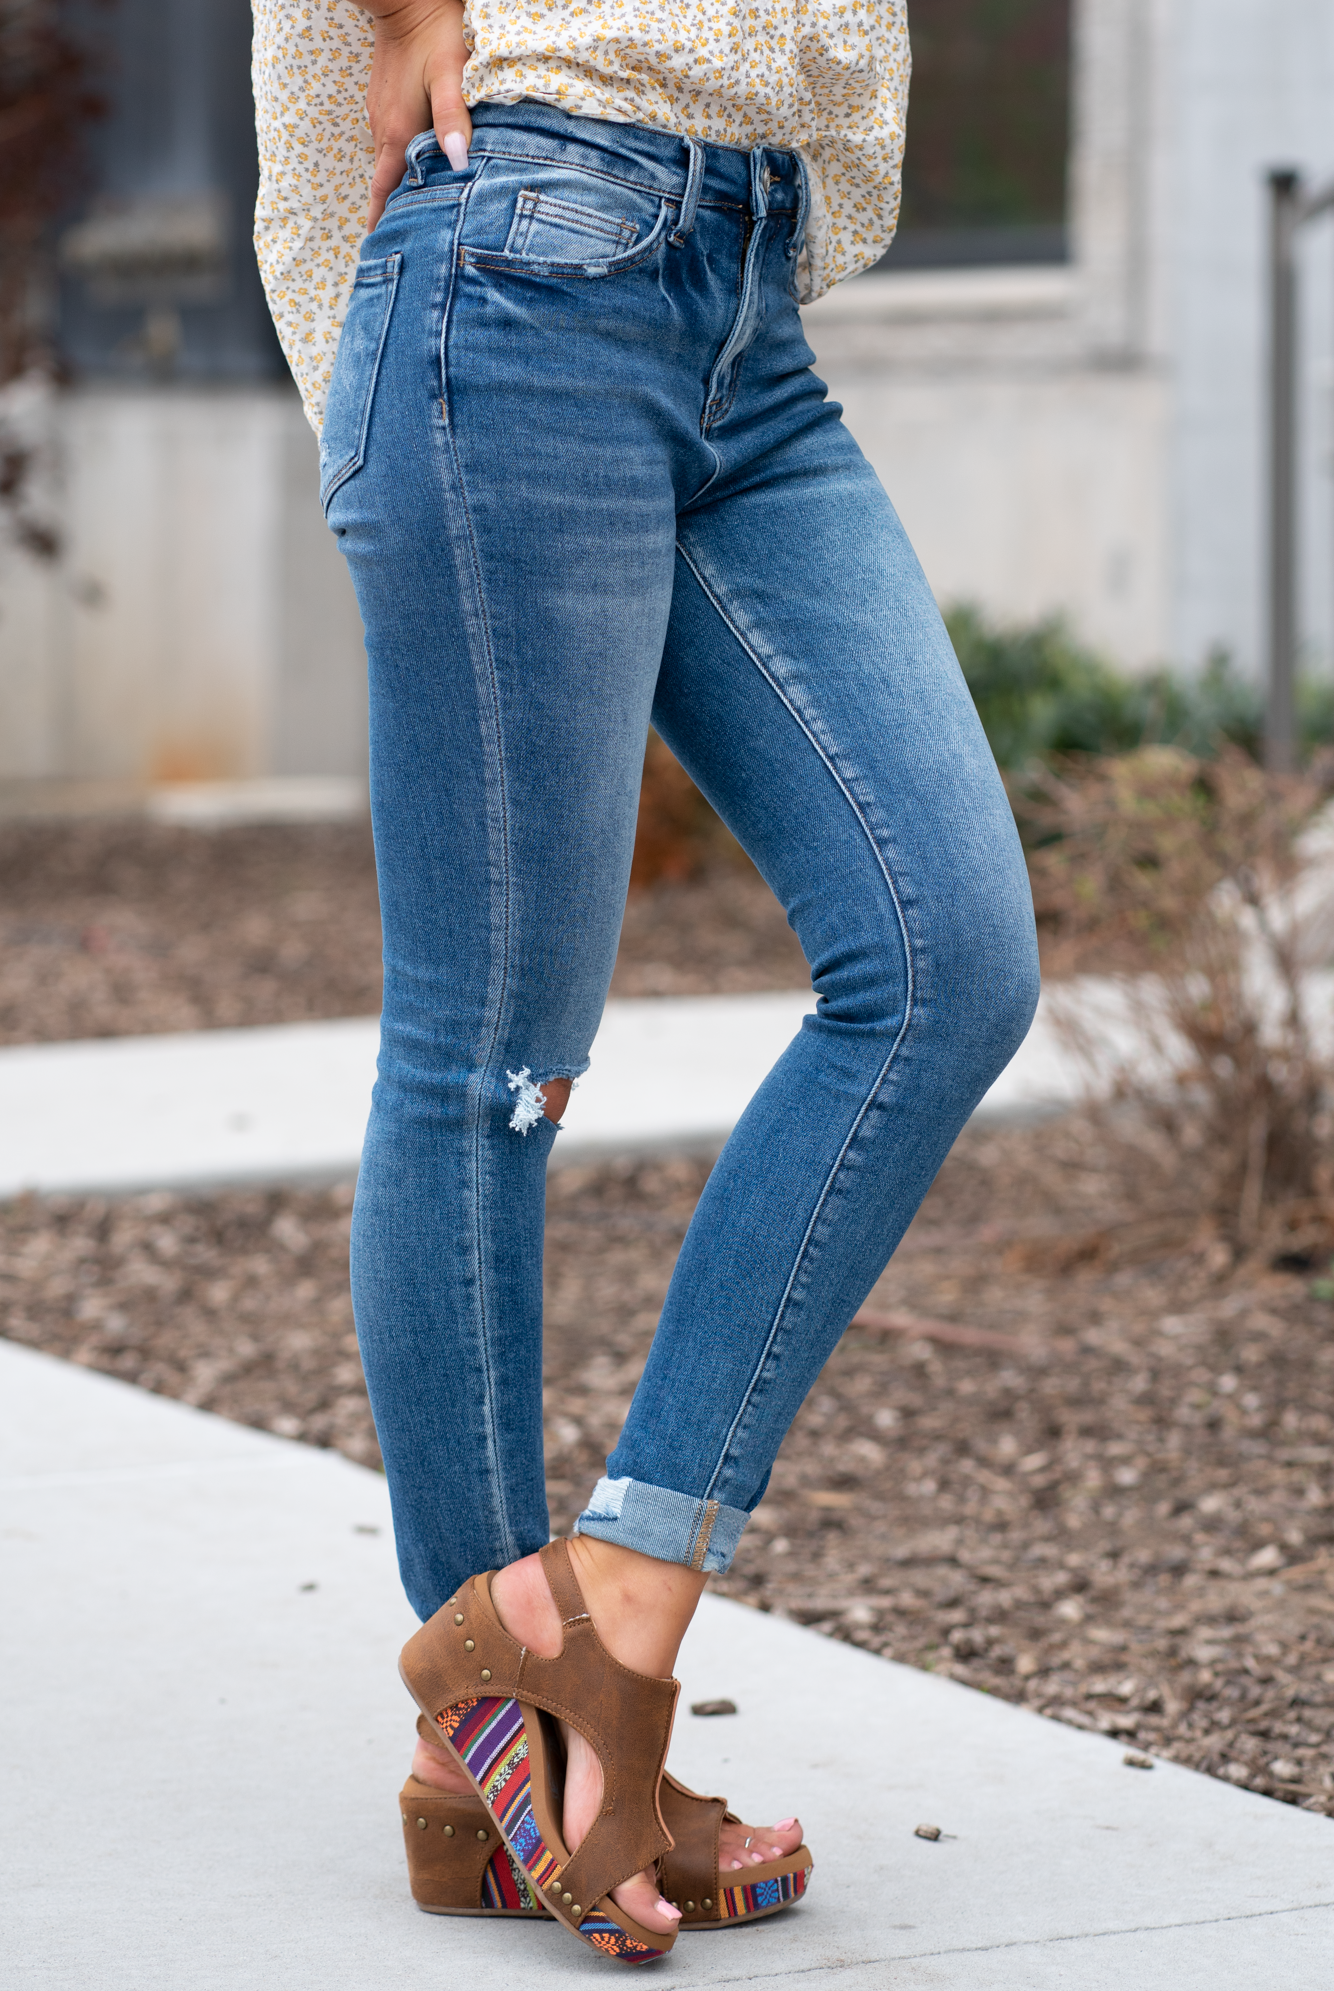 Vervet Flying Monkey Jeans  These high-rise straight distressed jeans are so cute for spring. Pair with sandals and a tank for a casual day-out look.  Style Name: Satisfactory  Color: Dark Blue Wash  Cut: Ankle Skinny, 27" Rise: Suoer High-Rise, 10" Front Rise Material: 90.5%COTTON, 7.5%POLYESTER, 2%SPANDEX Machine Wash Separately In Cold Water Stitching: Classic Fly: Zip Fly Style #: V2270M